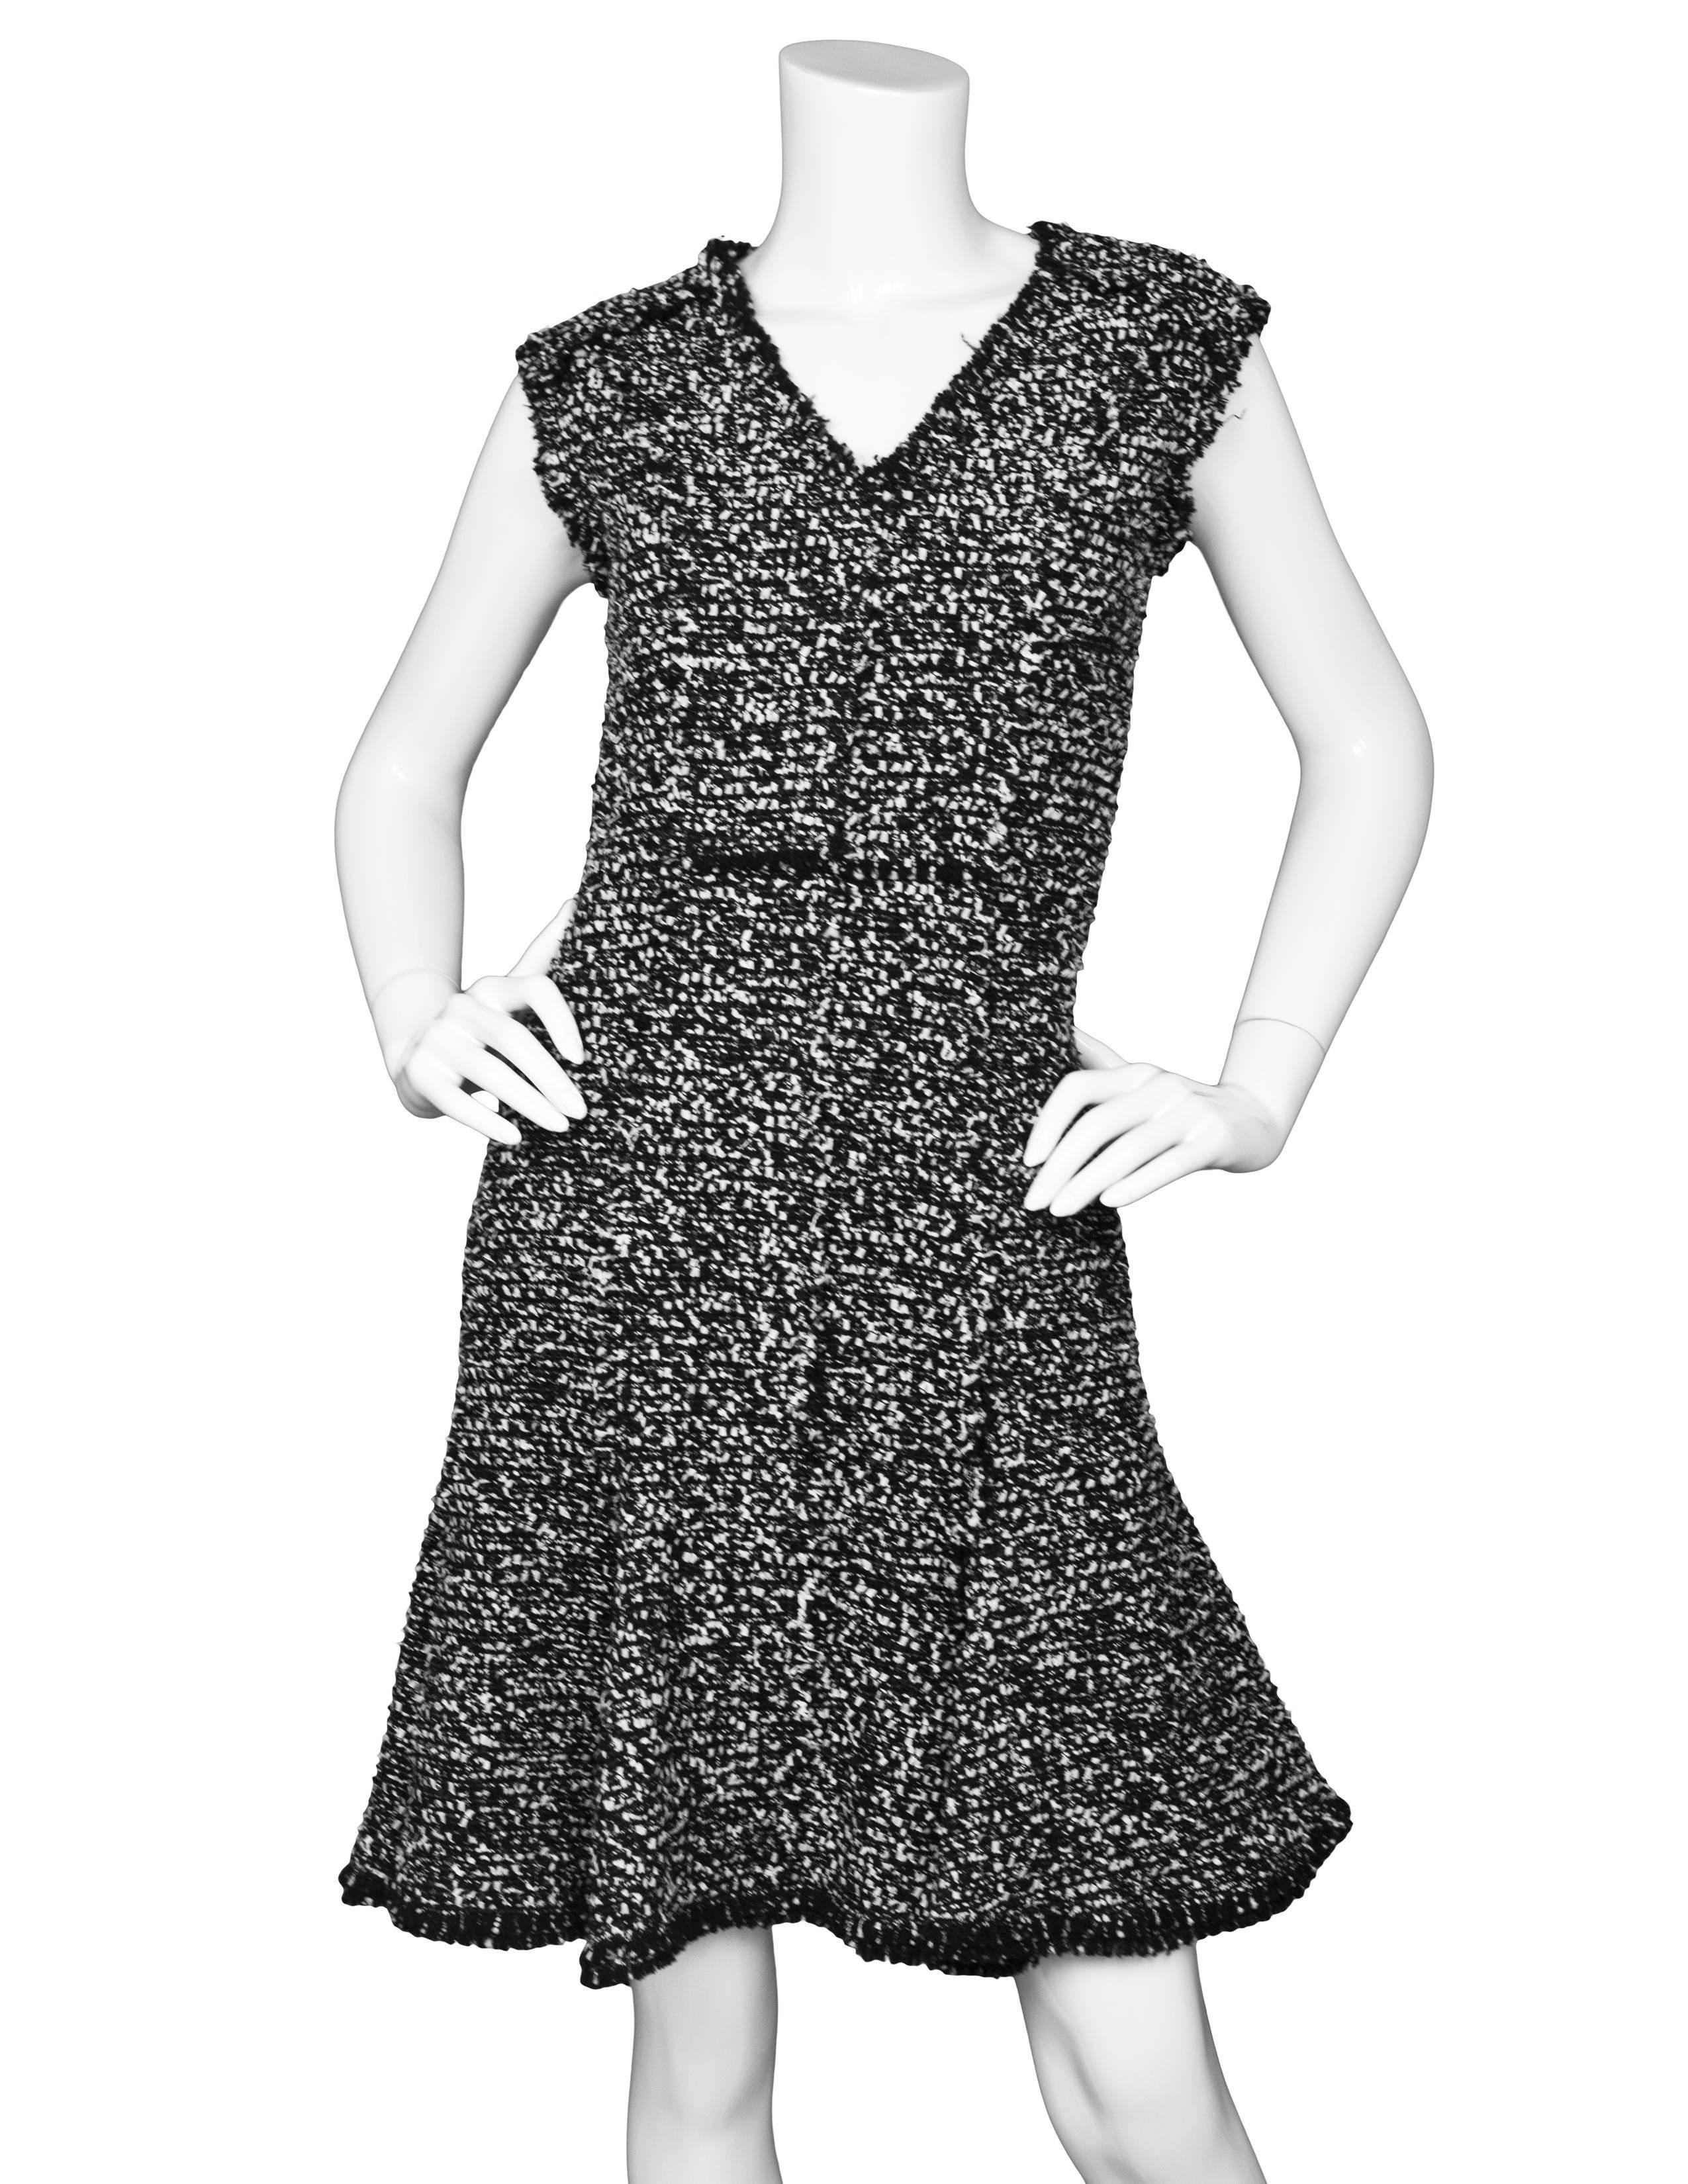 Michael Kors Black & White Tweed Sleeveless Dress Sz 2

Made In: Italy
Color: Black, white
Composition: 40% cotton, 31% wool, 20% polyamide, 8% rayon, 1% polyester
Lining: Black textile
Closure/Opening: Back center zip up
Overall Condition: Excellen